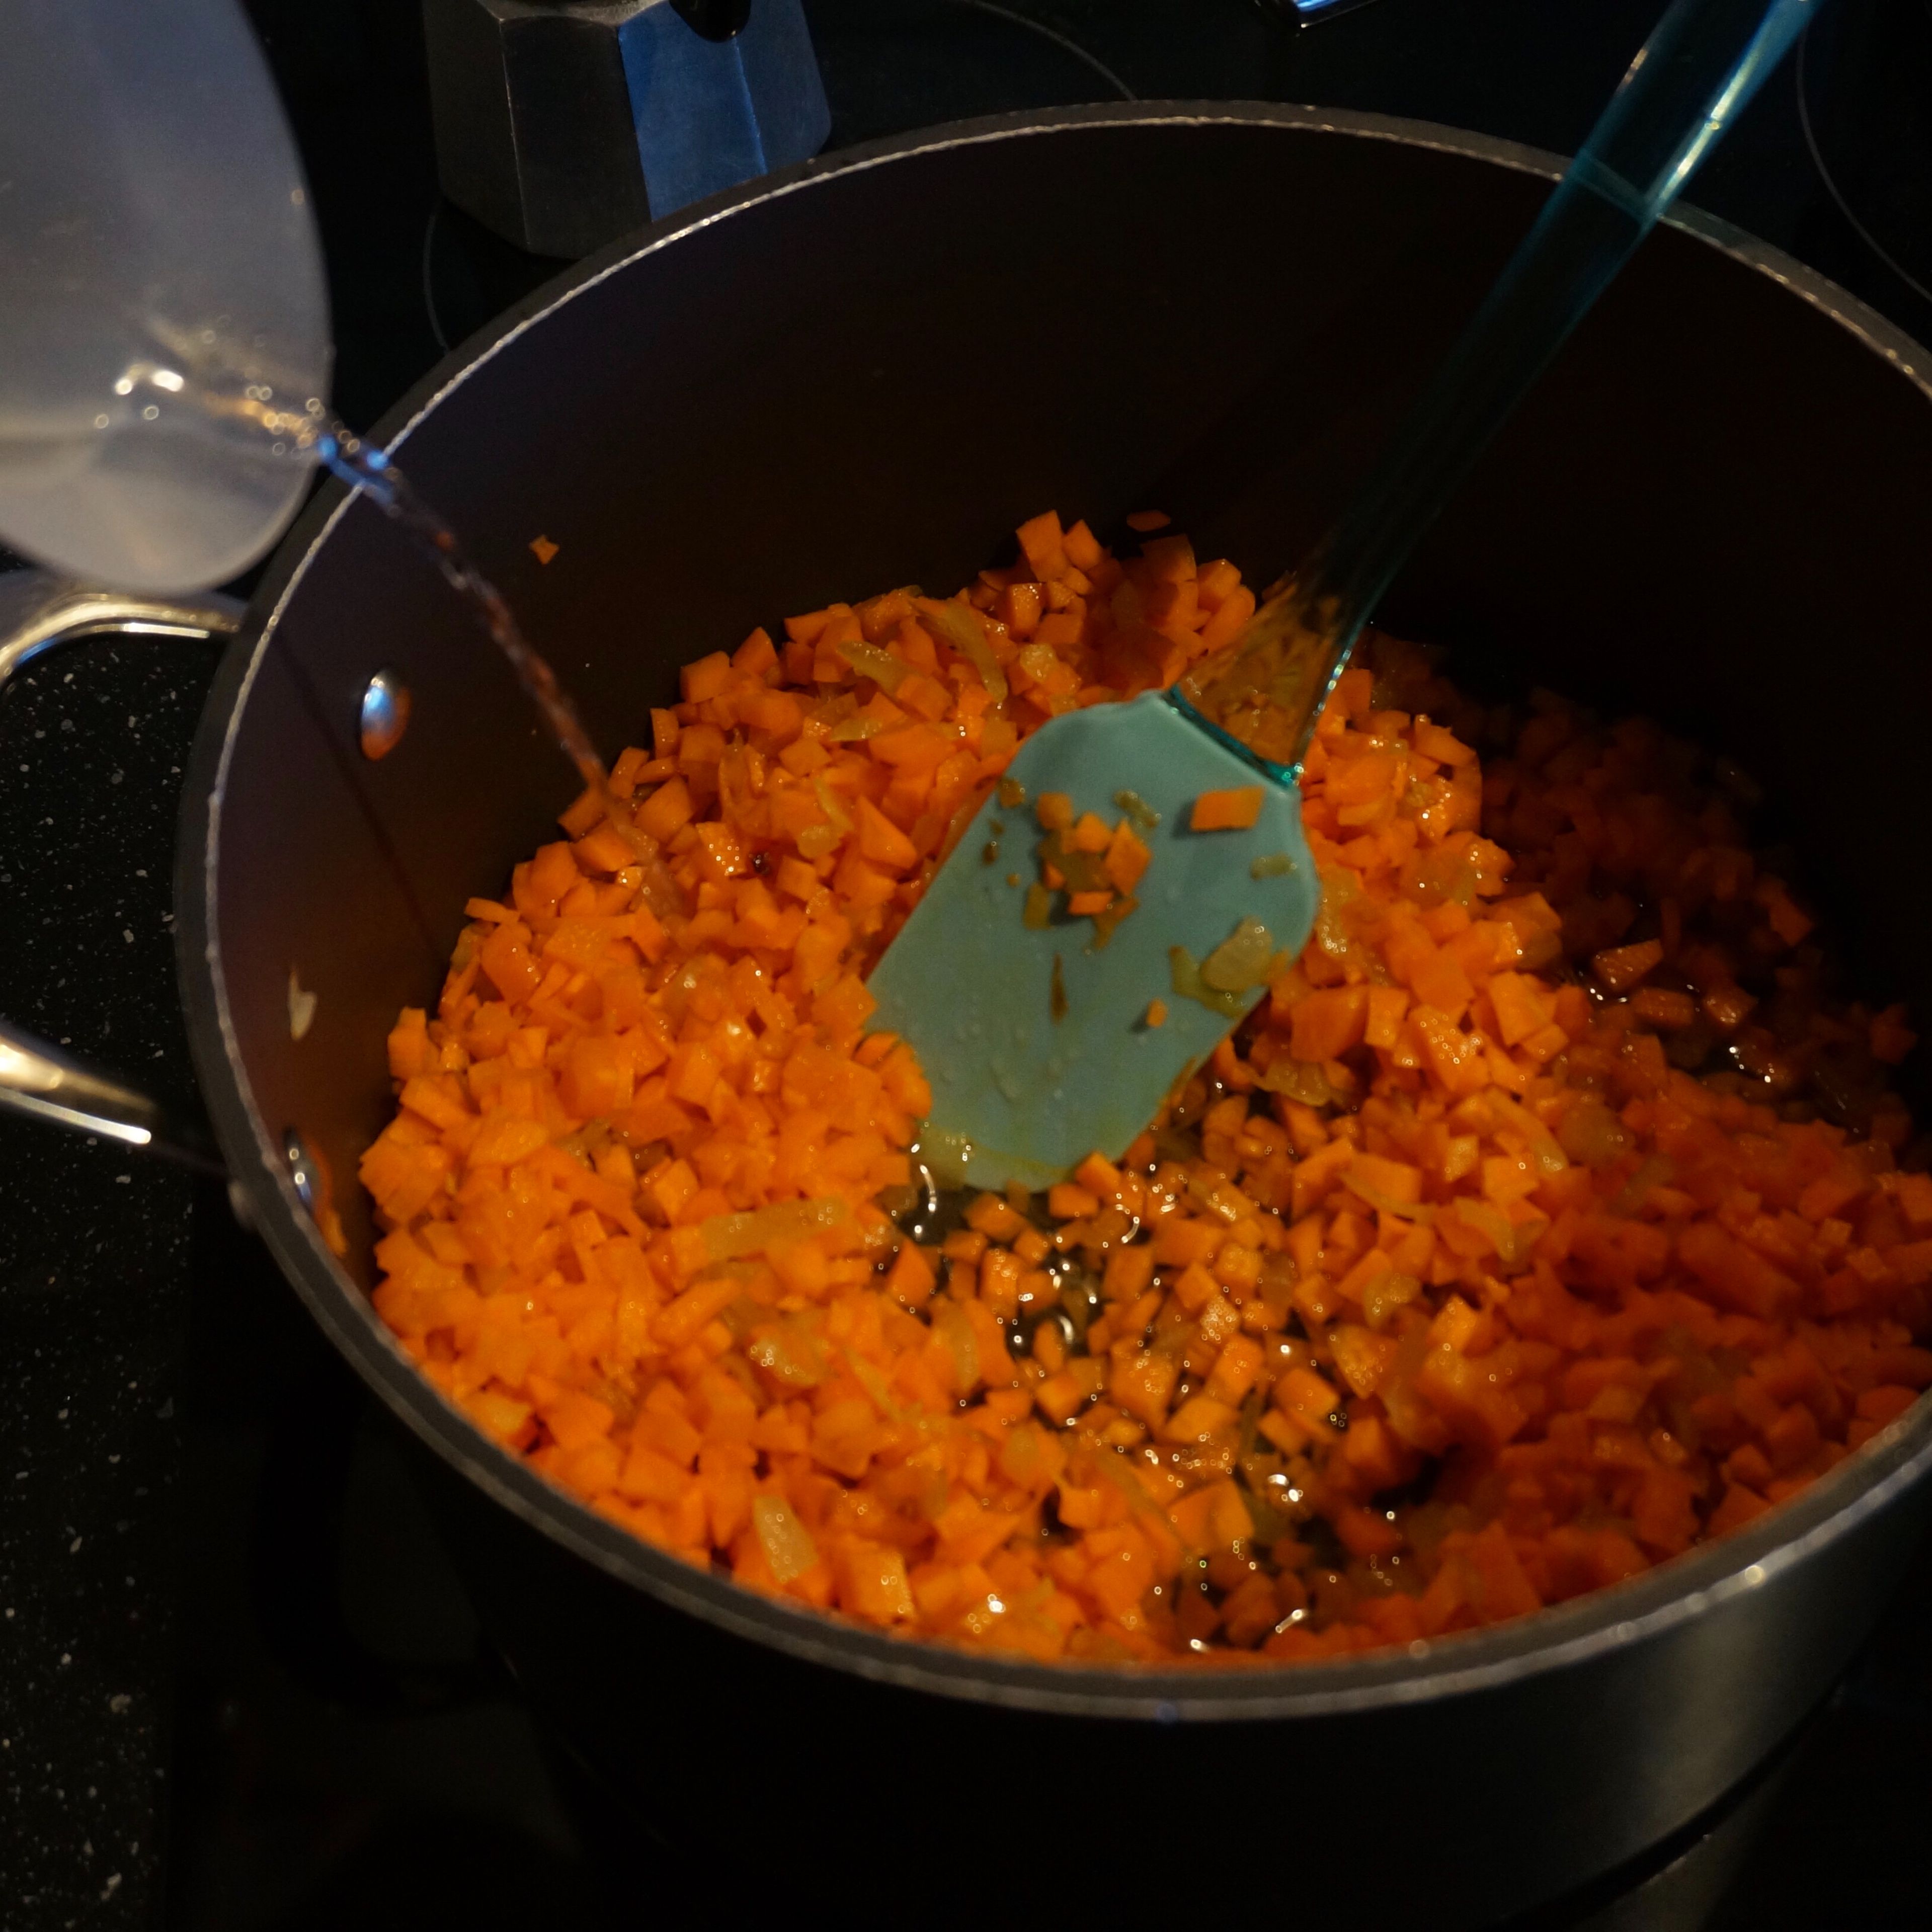 Cut the carrots into small cubes, add to the onion. Fry for 1 minute and then add water. Cover the saucepan and simmer for about 10 minutes.